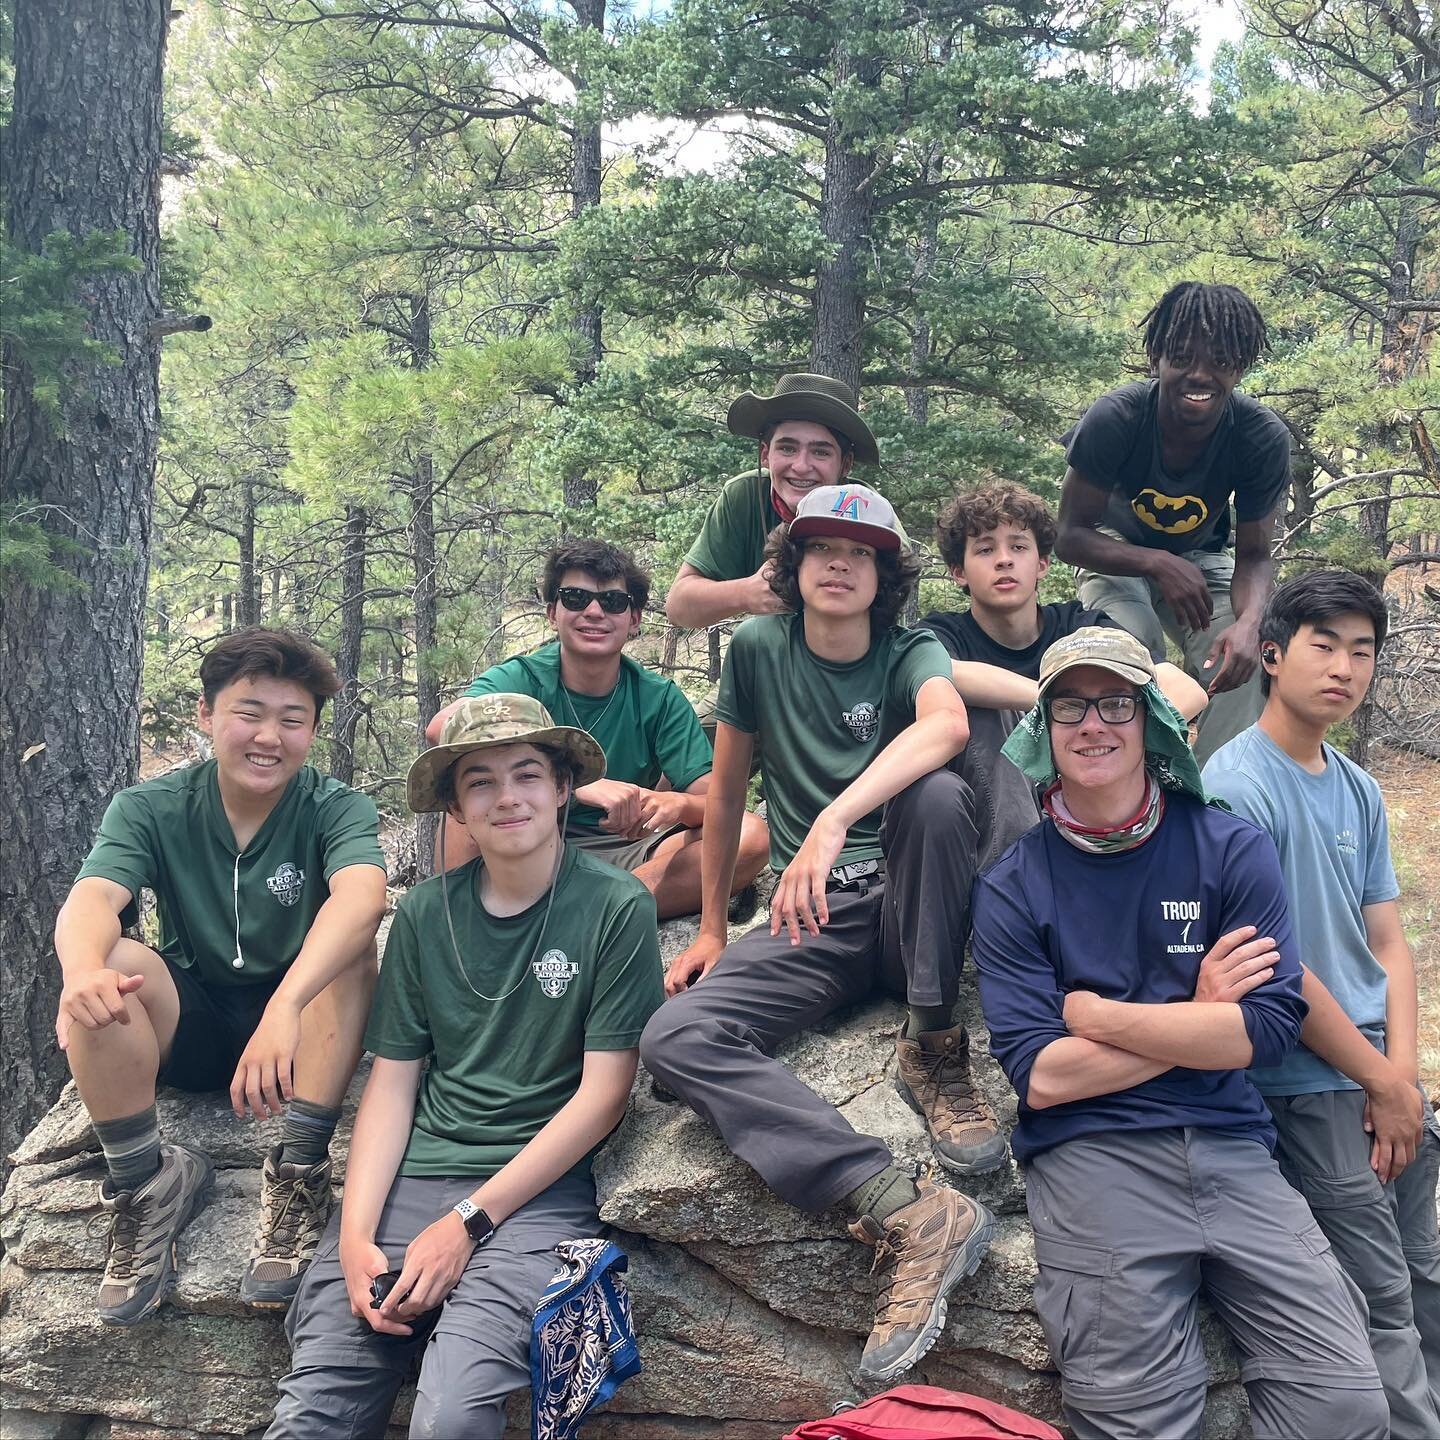 Troop 1 Philmont Crew 710-7E after climbing the Tooth of Time and still looking fresh! #philmontscoutranch #troop1altadena